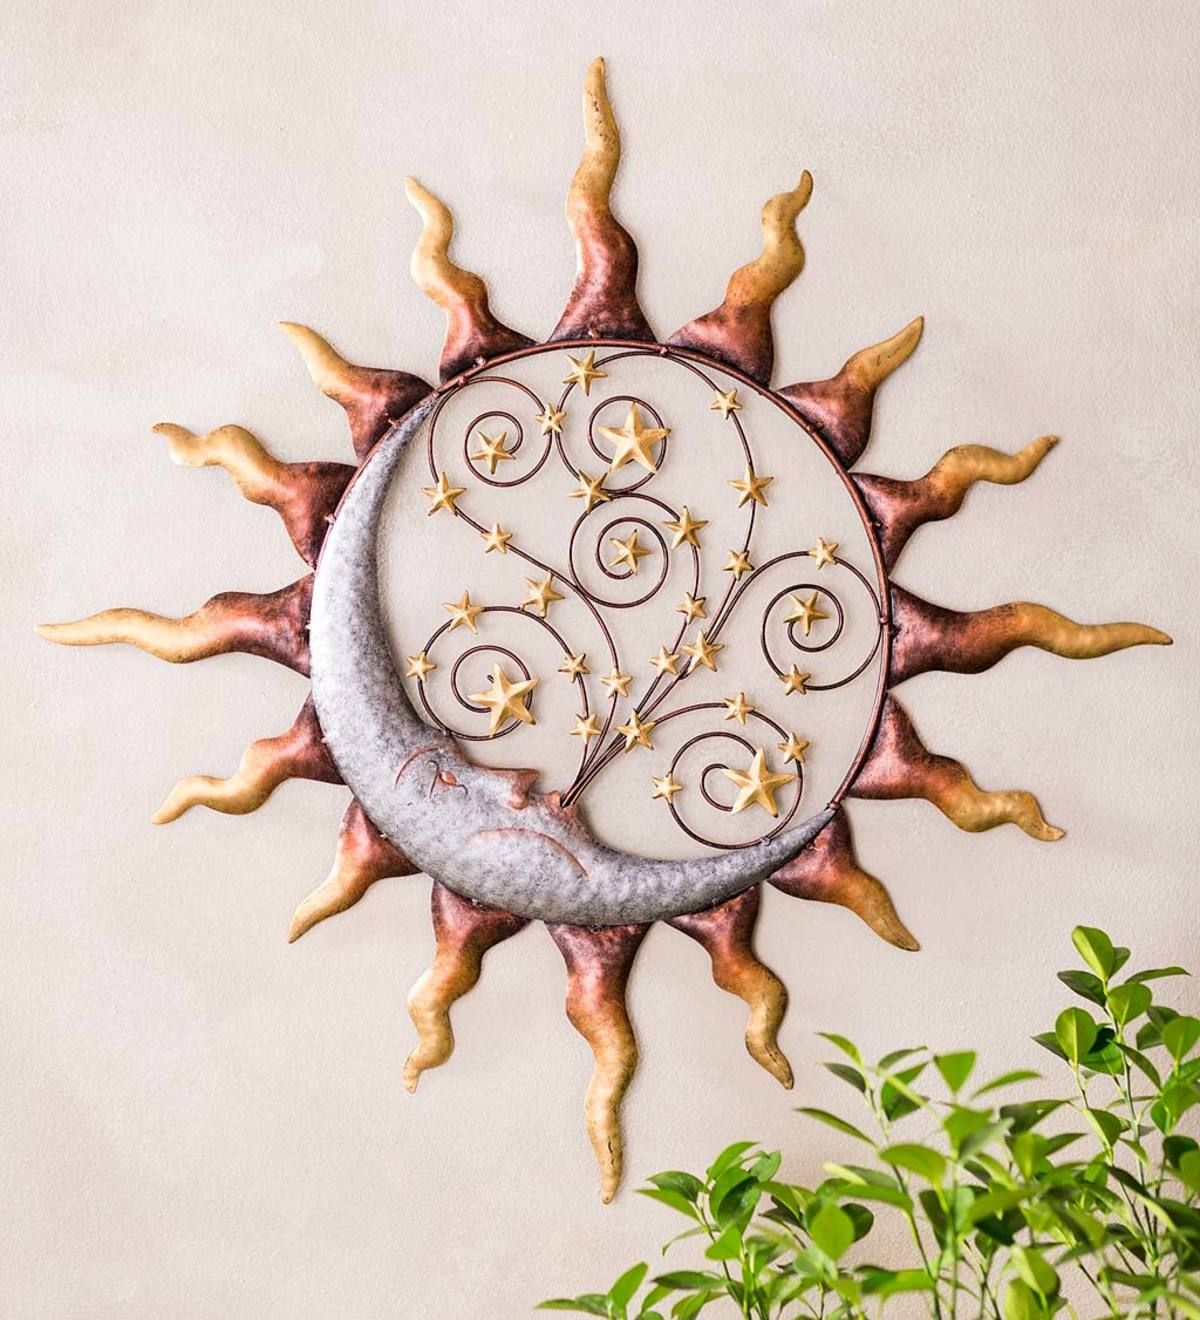 Handcrafted Metal Sun, Stars And Blowing Moon Wall Art | Wind And Weather Pertaining To The Sun Wall Art (View 15 of 15)